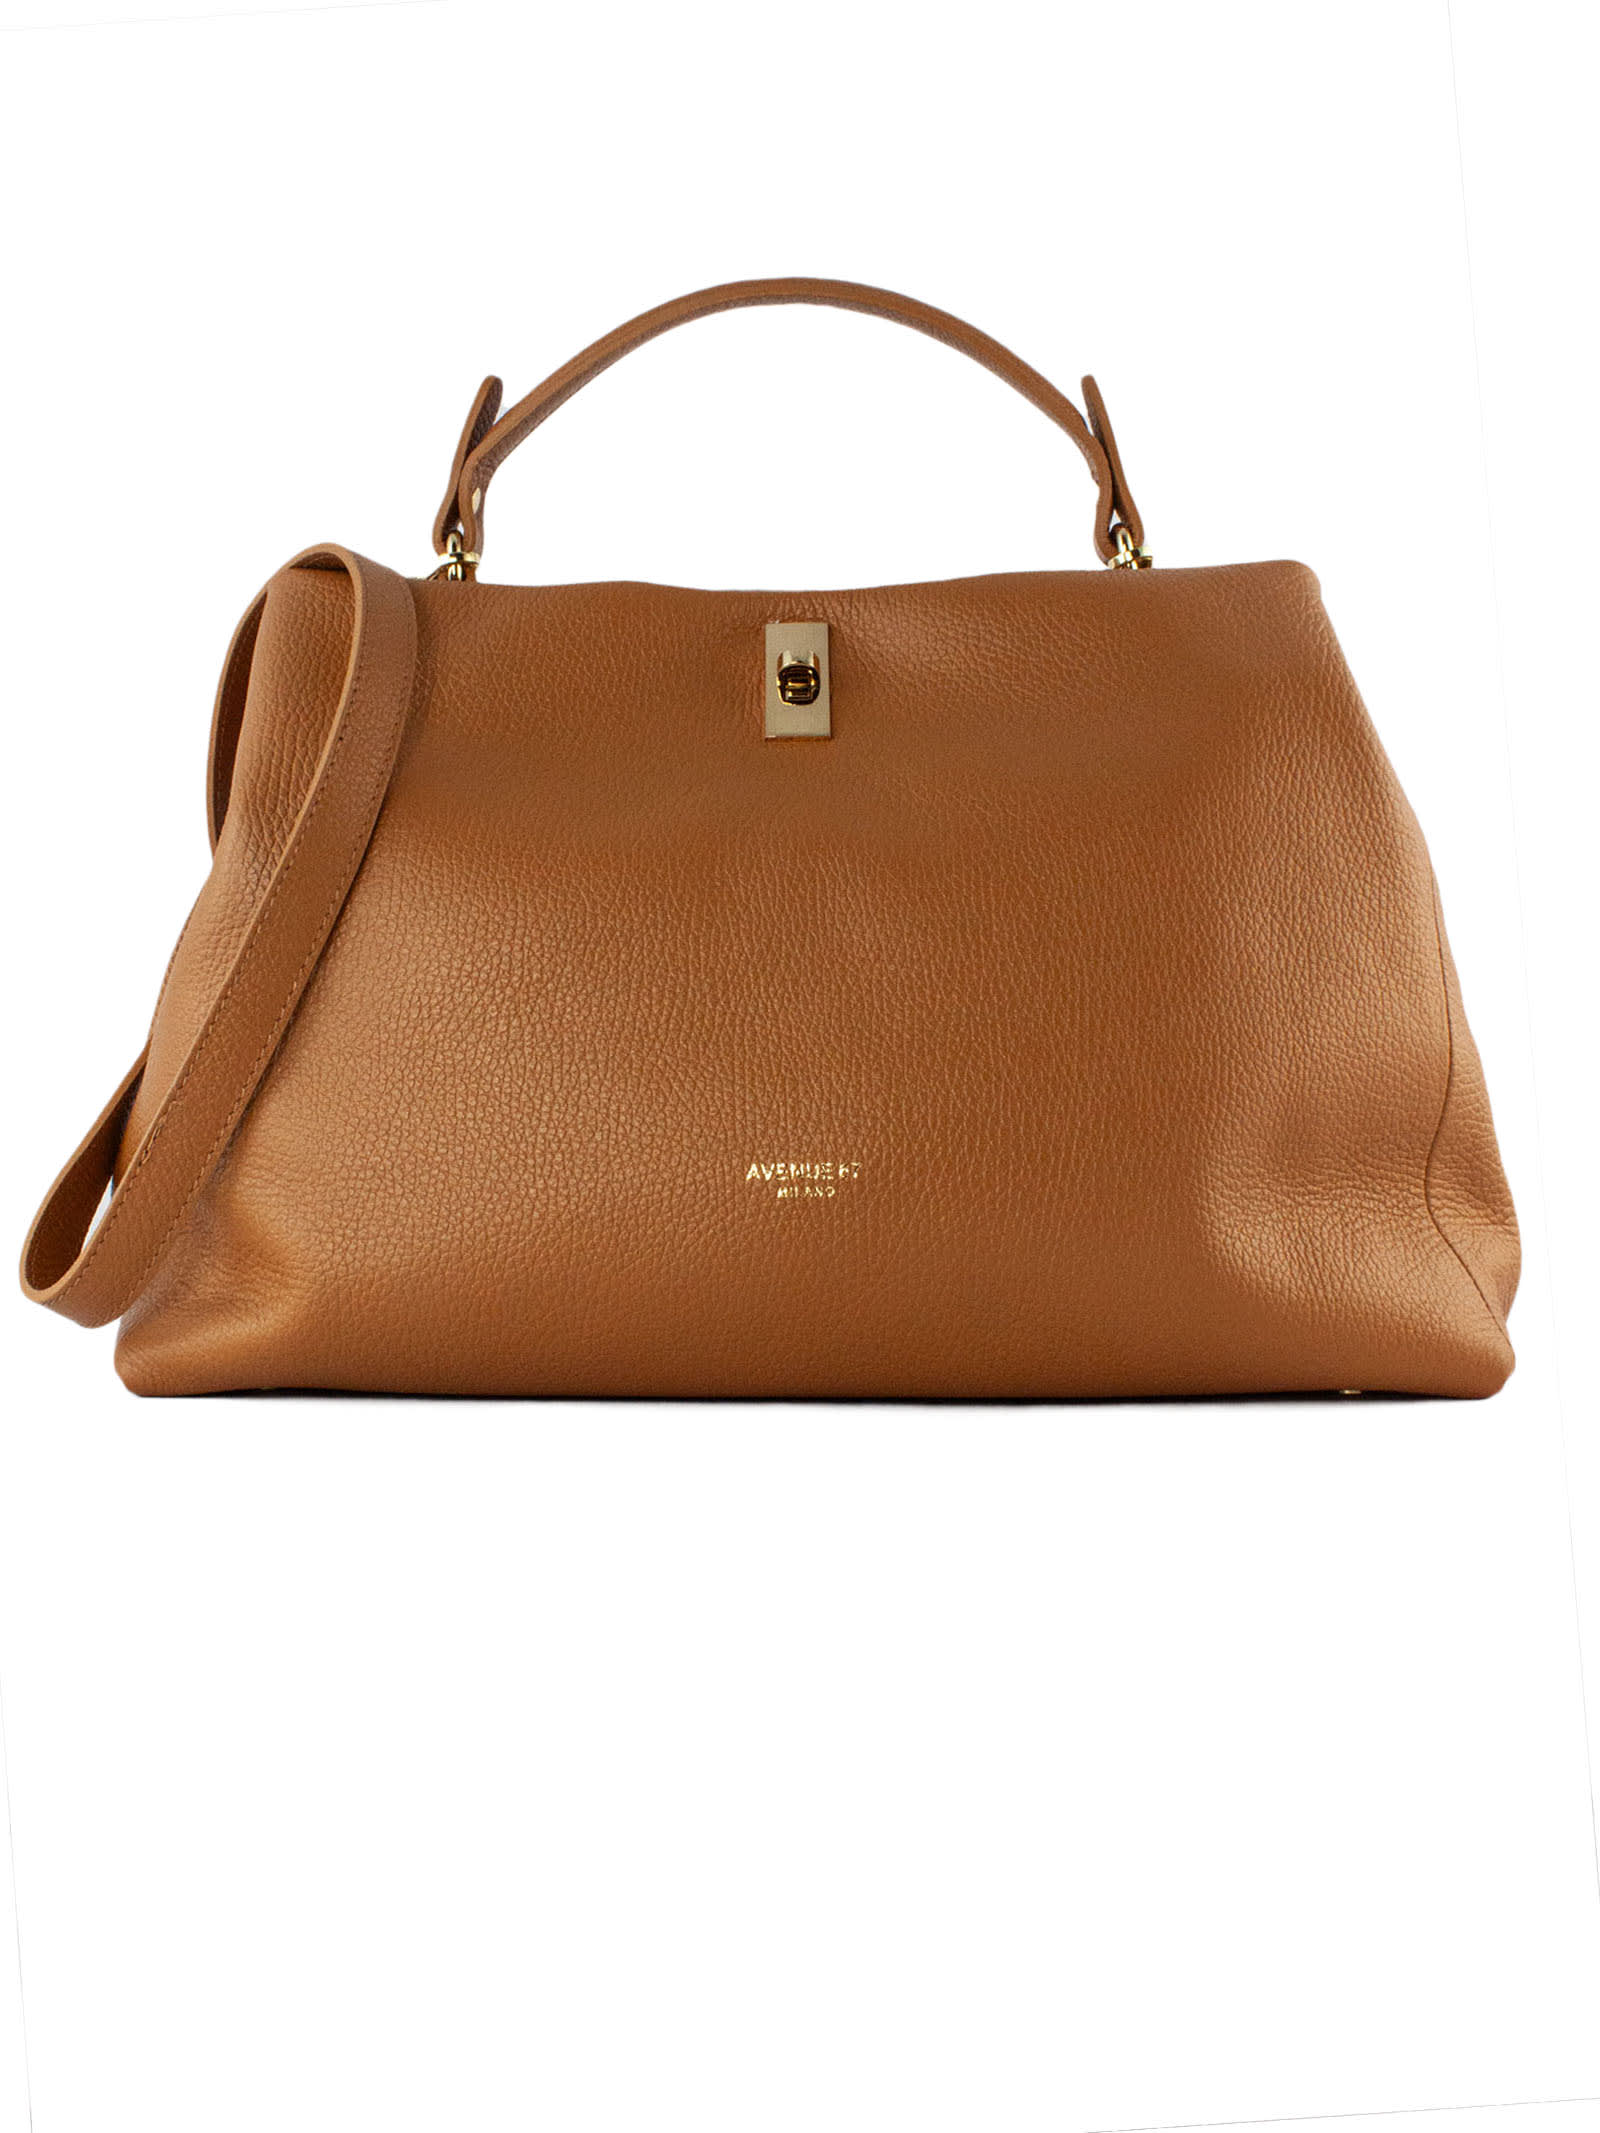 AVENUE 67 BROWN GRAINED SOFT LEATHER BAG